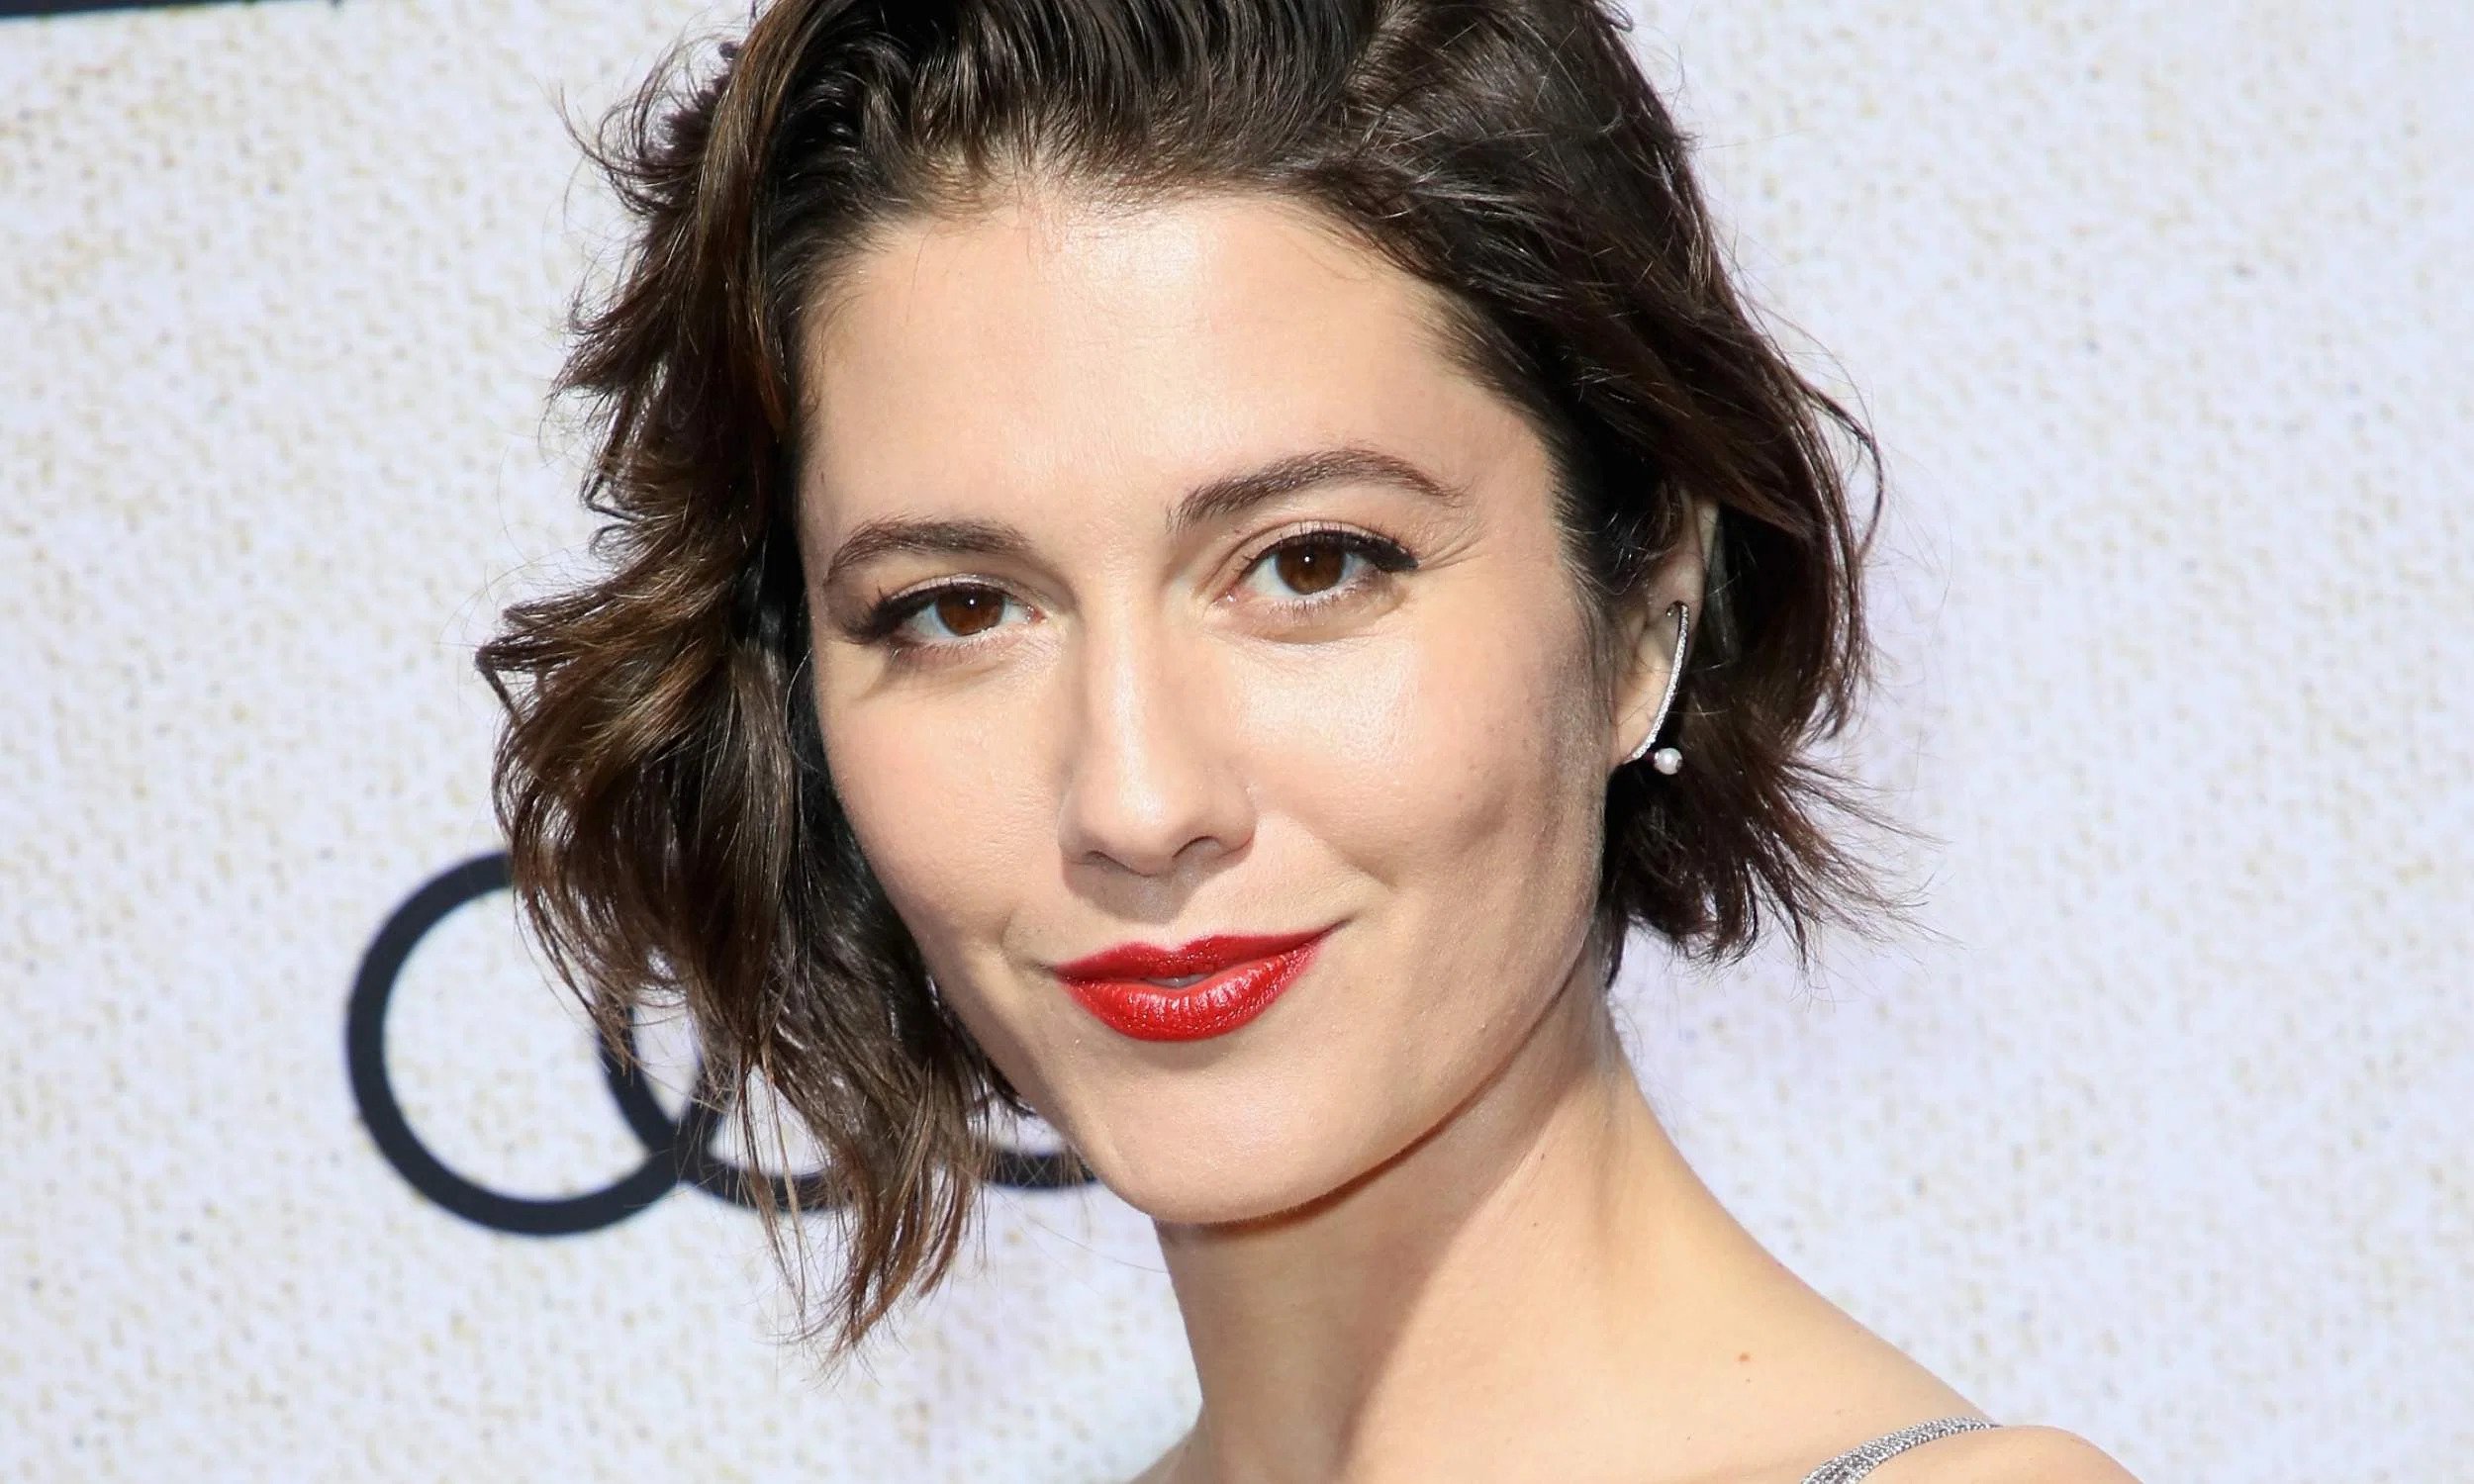 35 Facts about Mary Elizabeth Winstead - Facts.net